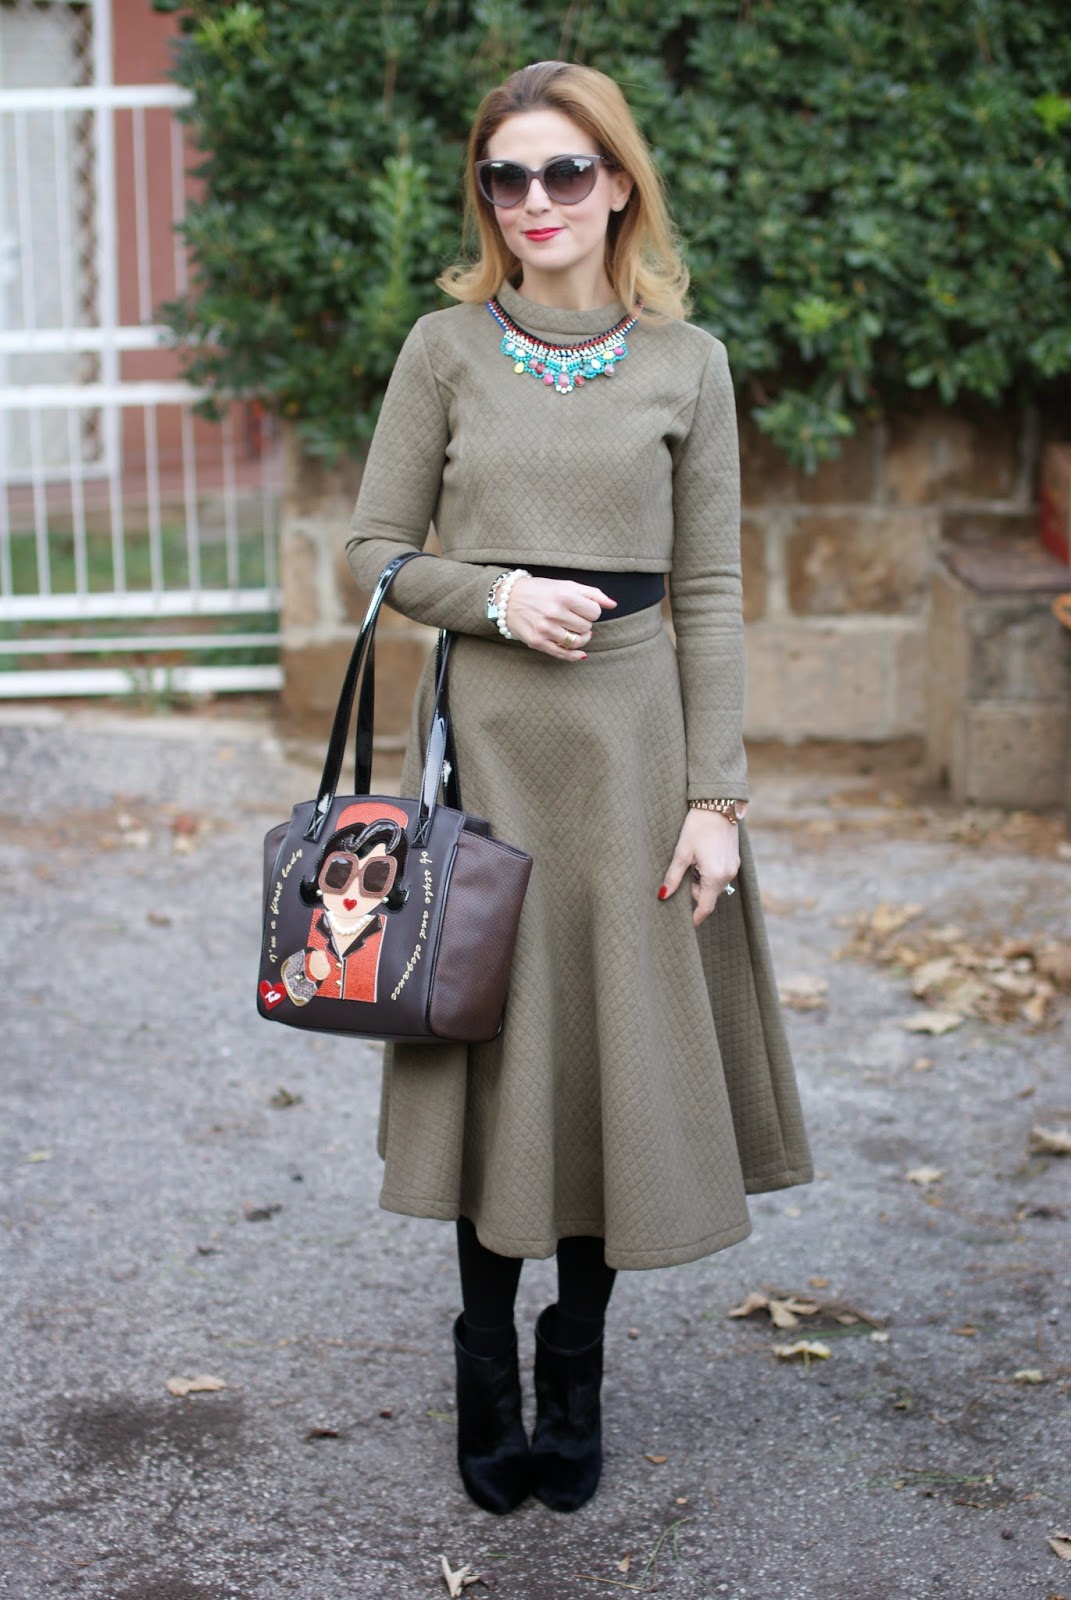 Quilted crop top and midi skirt, Braccialini Jackie Kennedy bag, Le Silla ankle boots, Fashion and Cookies, fashion blogger